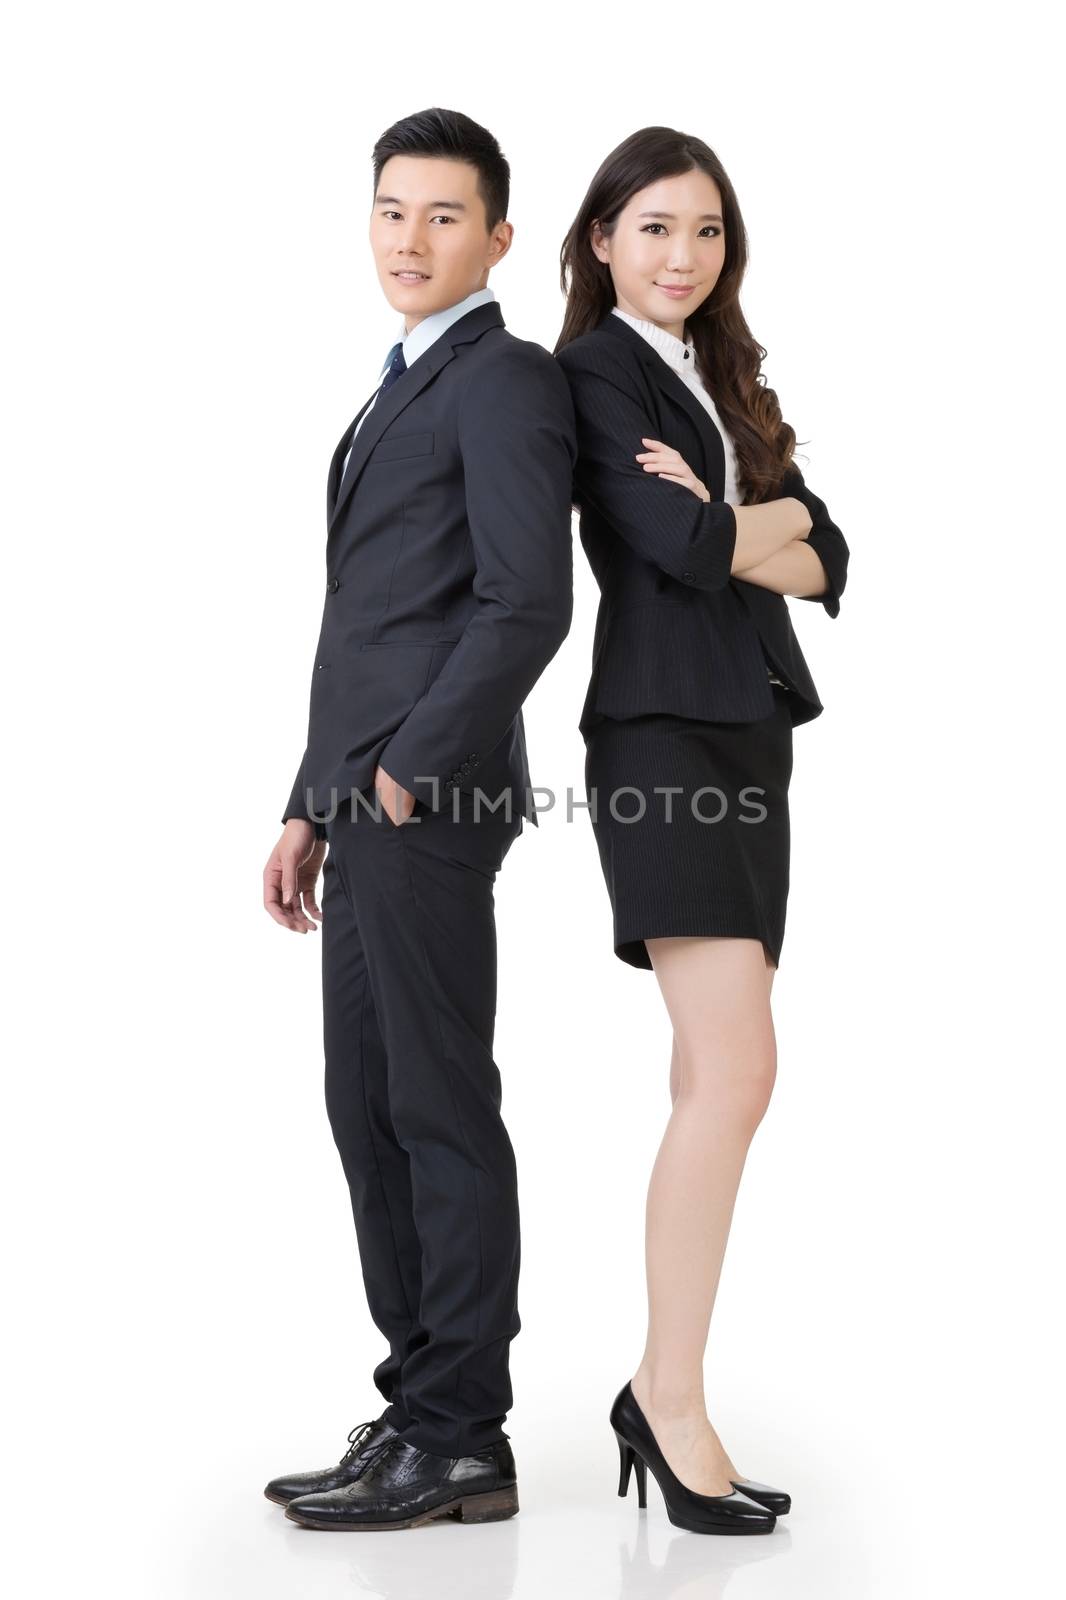 Confident Asian business man and woman, full length portrait isolated on white background.